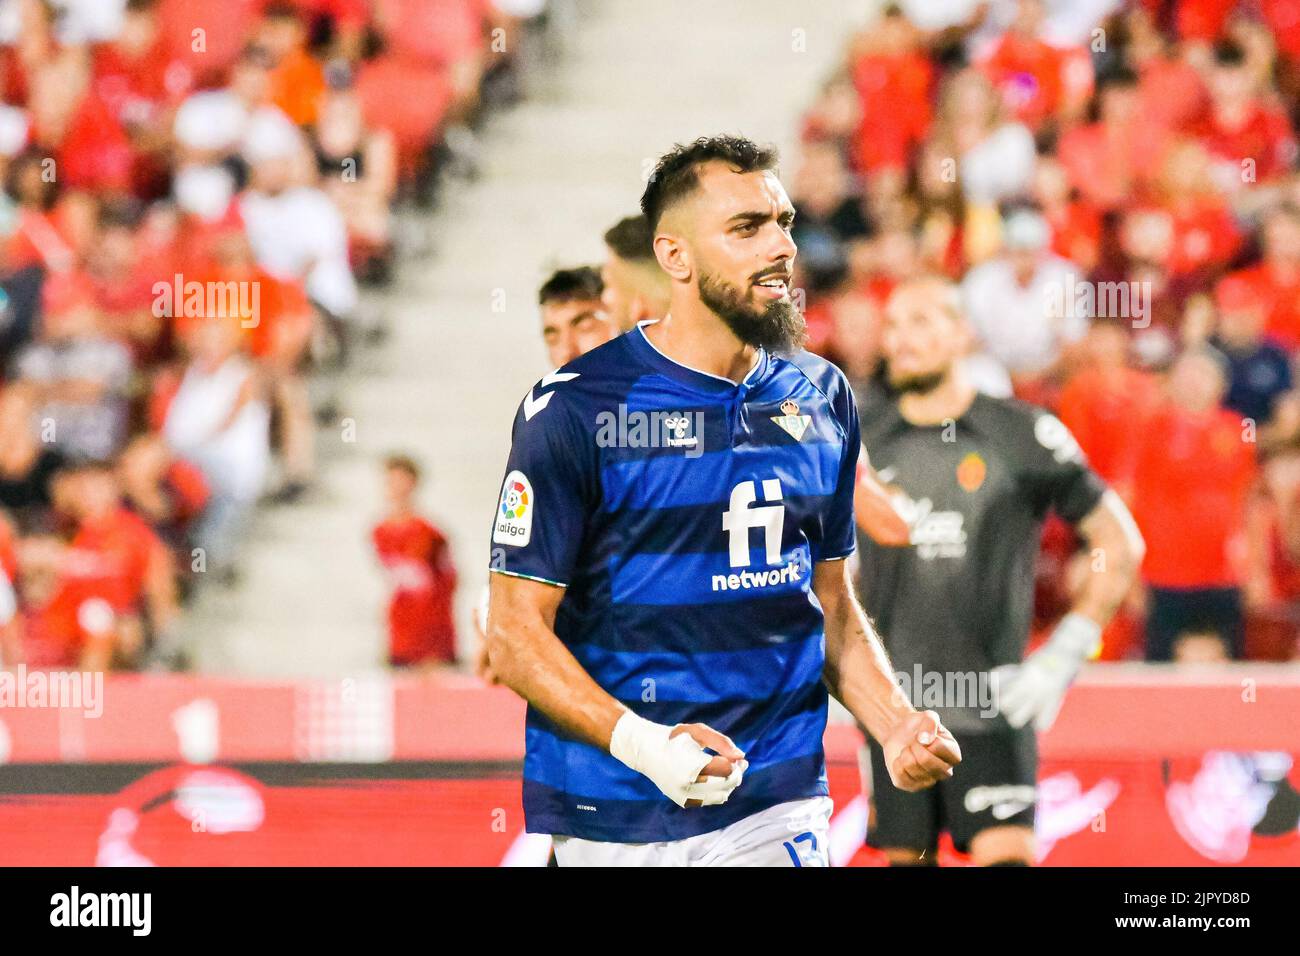 MALLORCA, SPAIN - AUGUST 20: Borja Iglesias of Real Betis celebration in the match between RCD Mallorca and Real Betis of La Liga Santander on August 20, 2022 at Visit Mallorca Stadium Son Moix in Mallorca, Spain. (Photo by Samuel Carreño/PxImages) Stock Photo